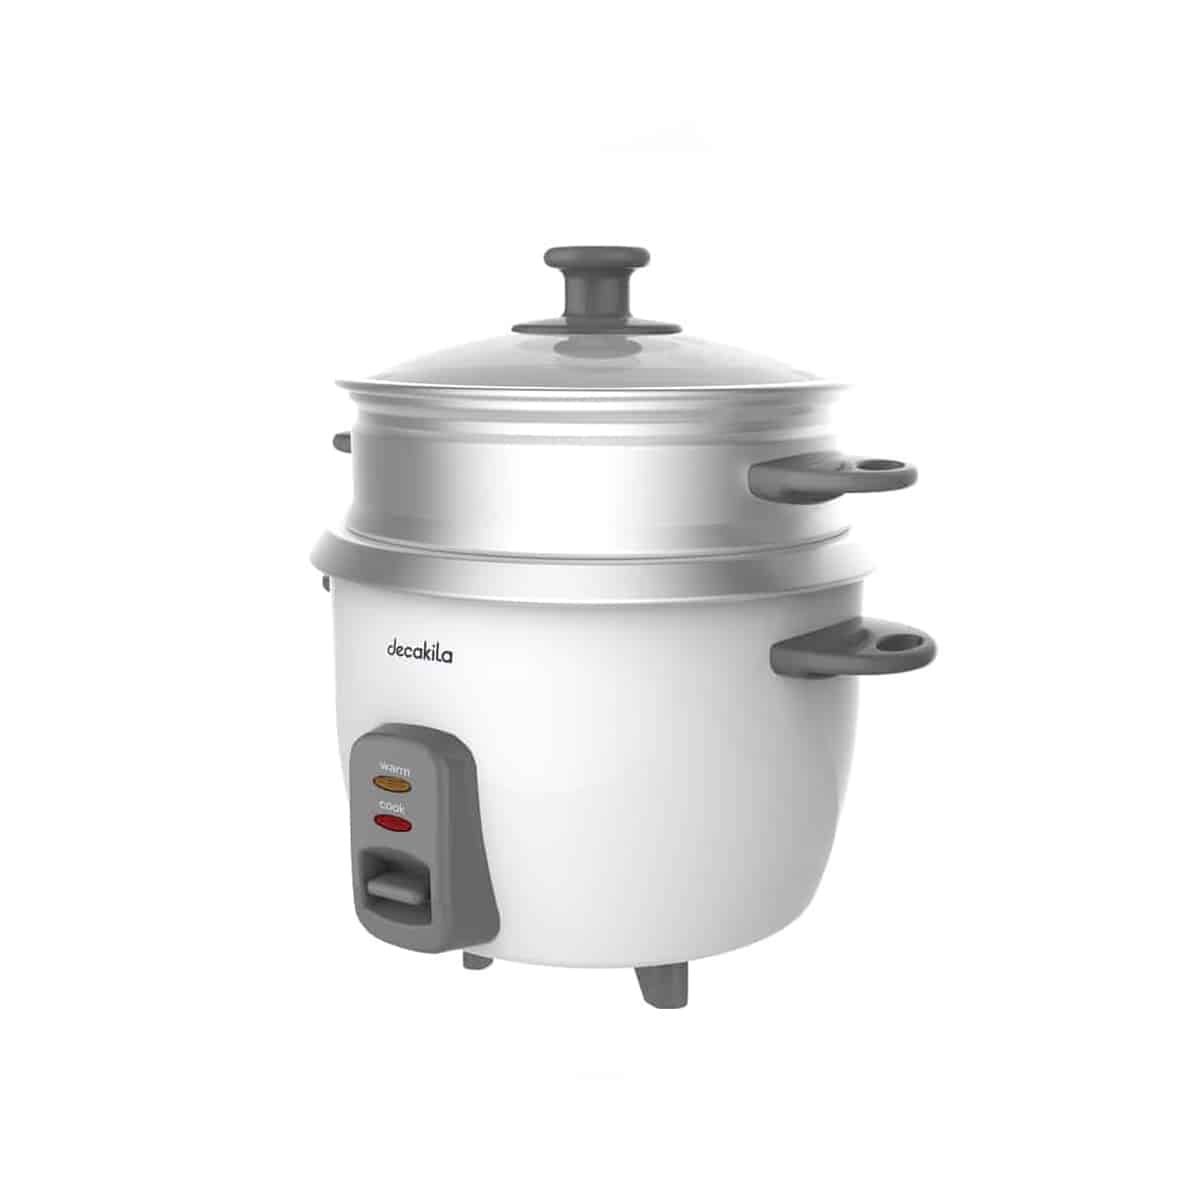 Decakila 1.5L Rice Cooker with Steamer KEER033W